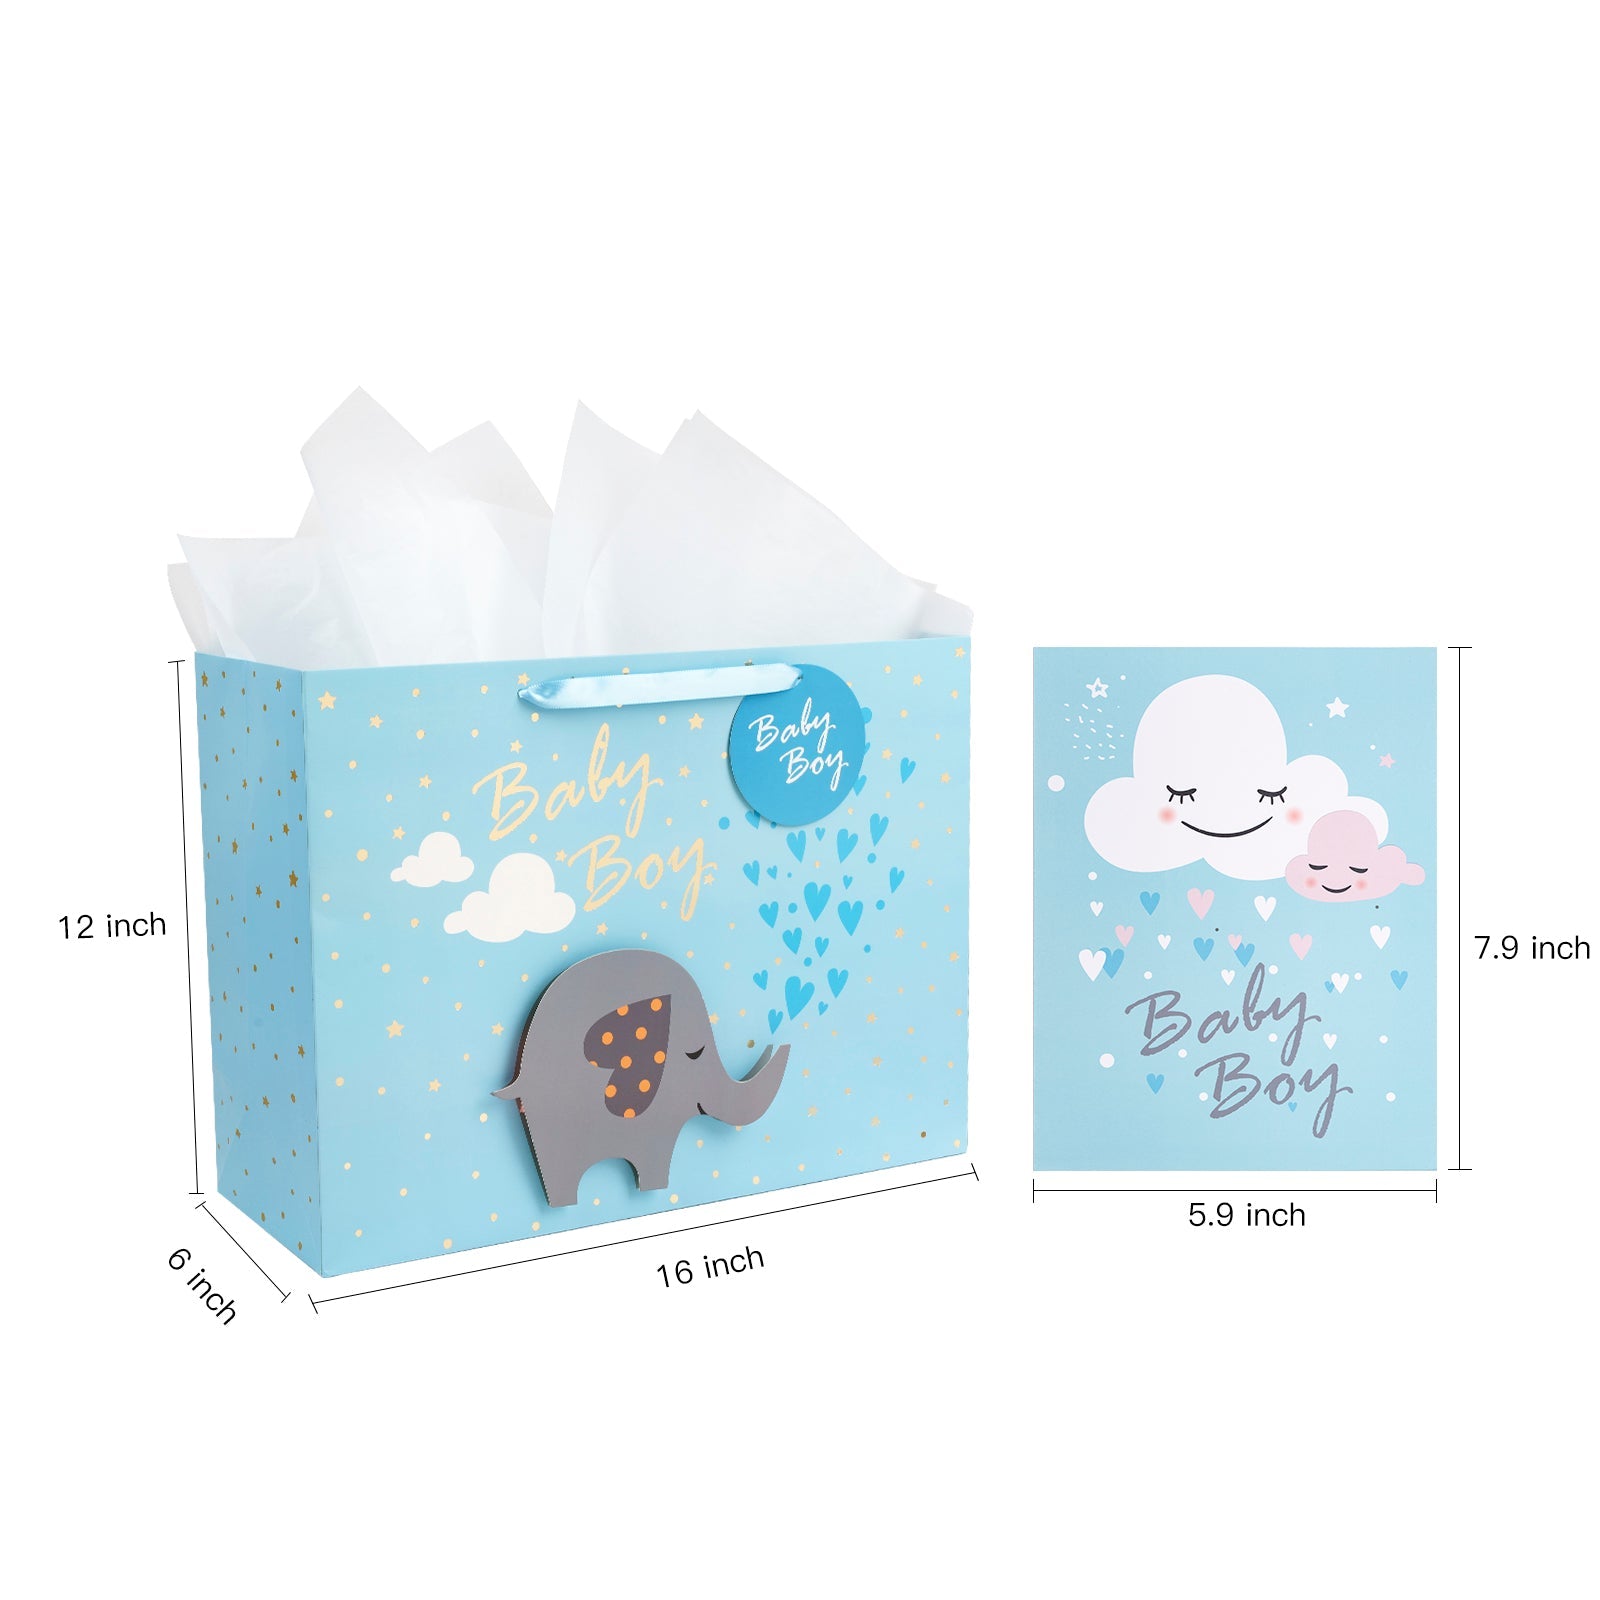 16 inch Extra Large Gift Bag with Gift Card  & Tissue Paper - Baby Boy 3D Making Design